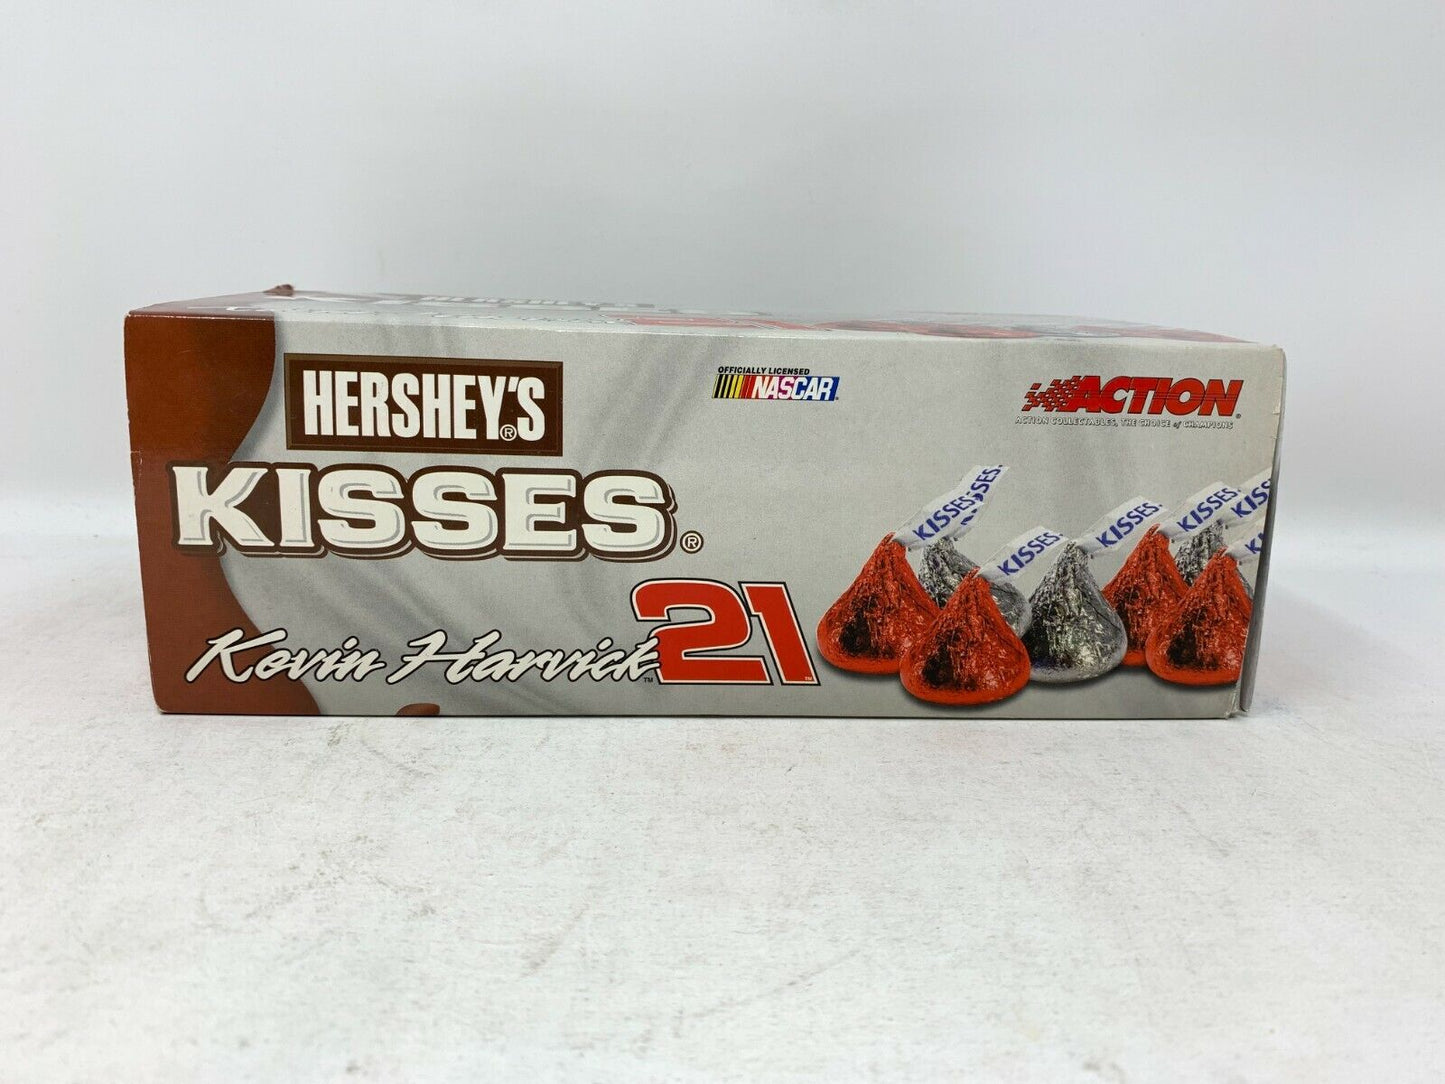 Action Nascar #21 Kevin Harvick Hershey's Kisses Chevy Monte Carlo 1:24 Diecast